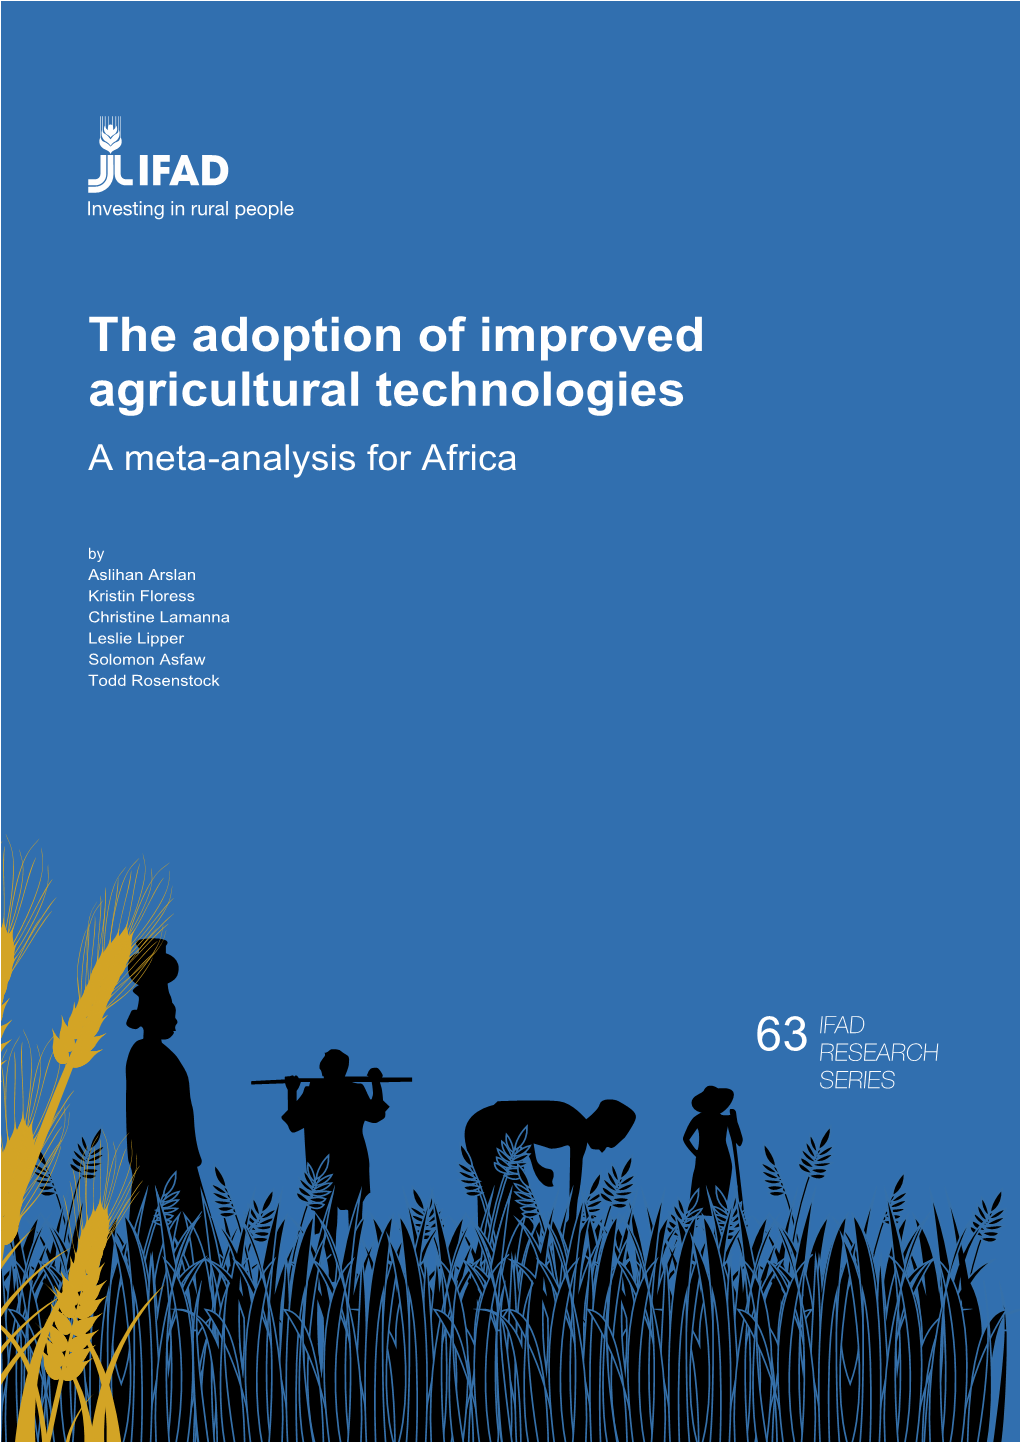 The Adoption of Improved Agricultural Technologies a Meta-Analysis for Africa